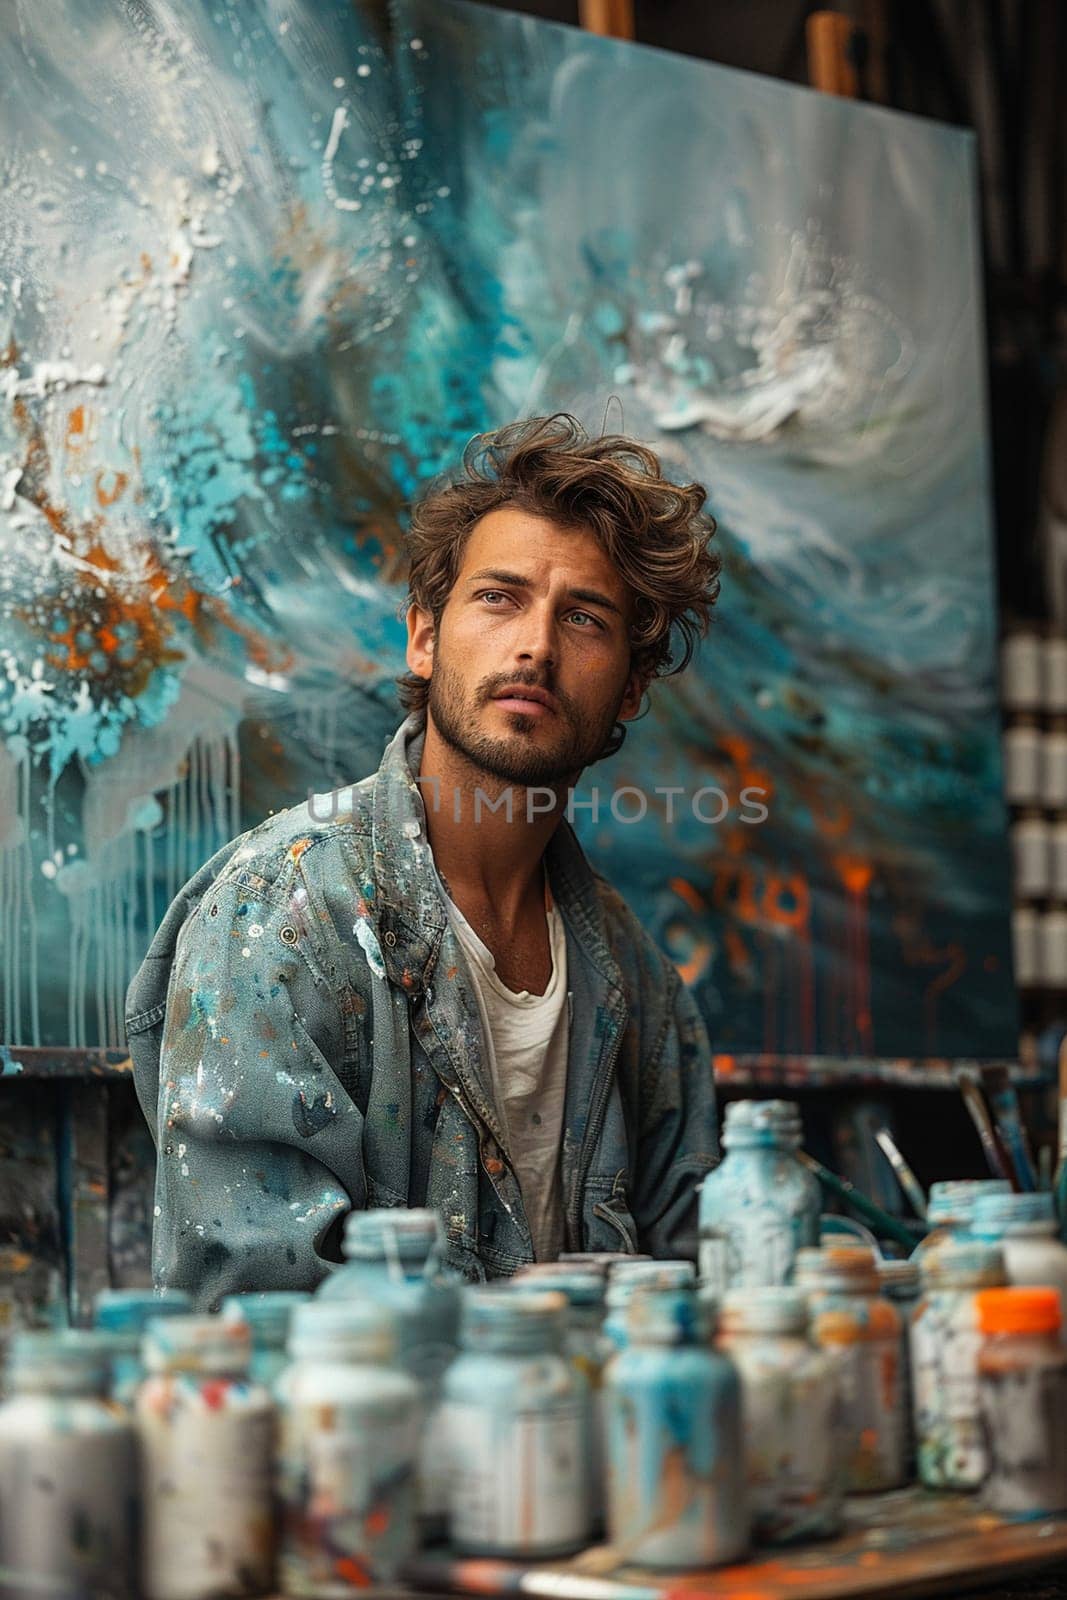 Creative Painter Shares Artistic Process in Bustling Studio by Benzoix